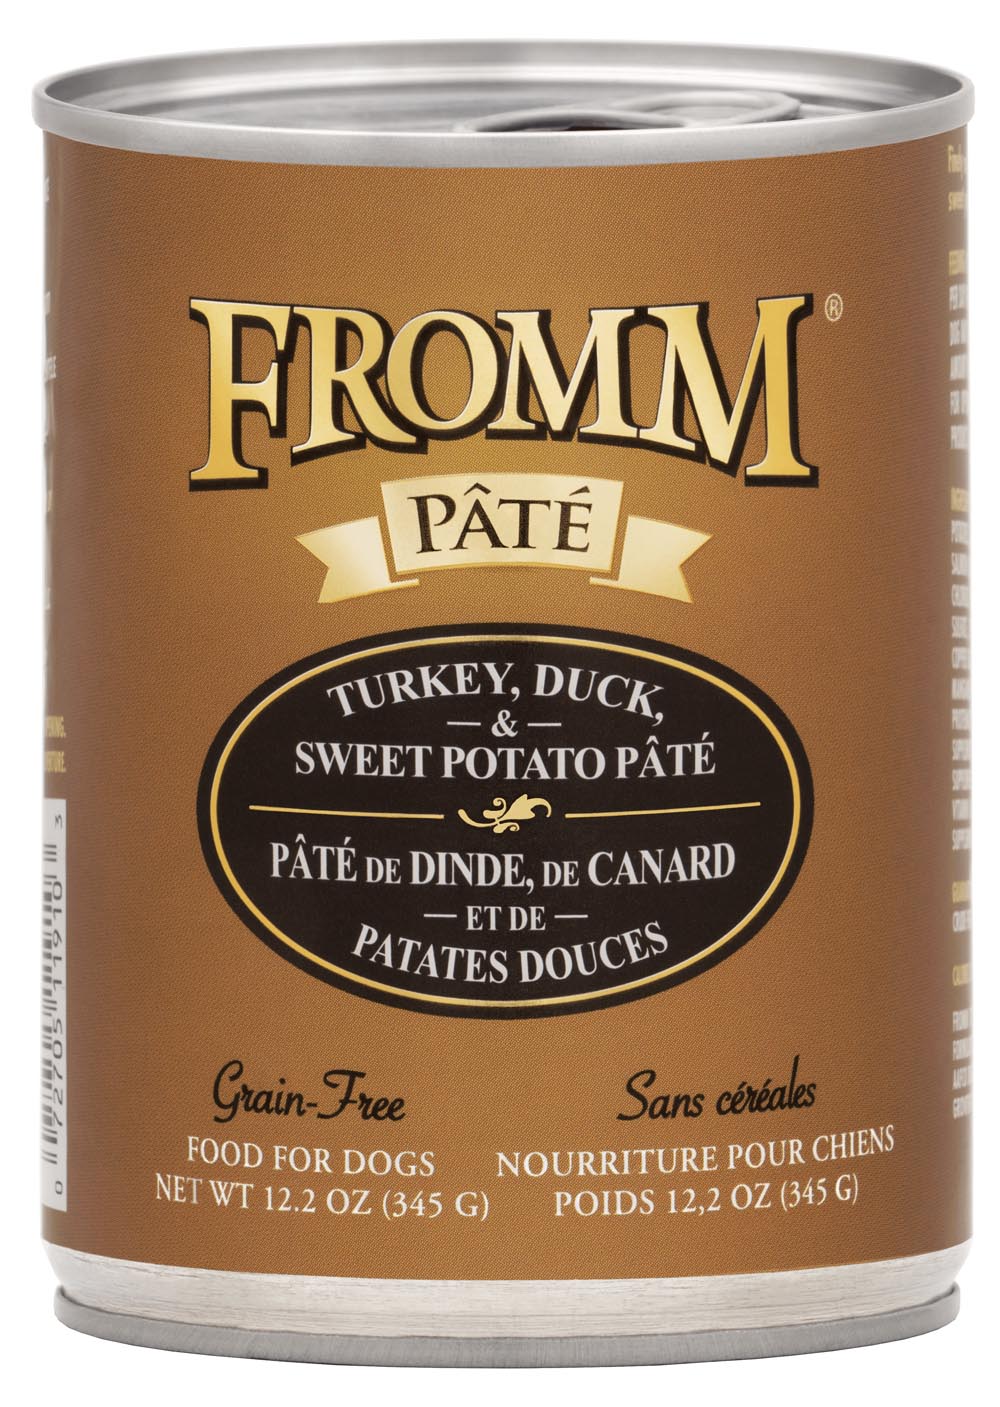 Fromm Turkey, Duck & Sweet Potato Pate Food for Dogs, 12.2 OZ